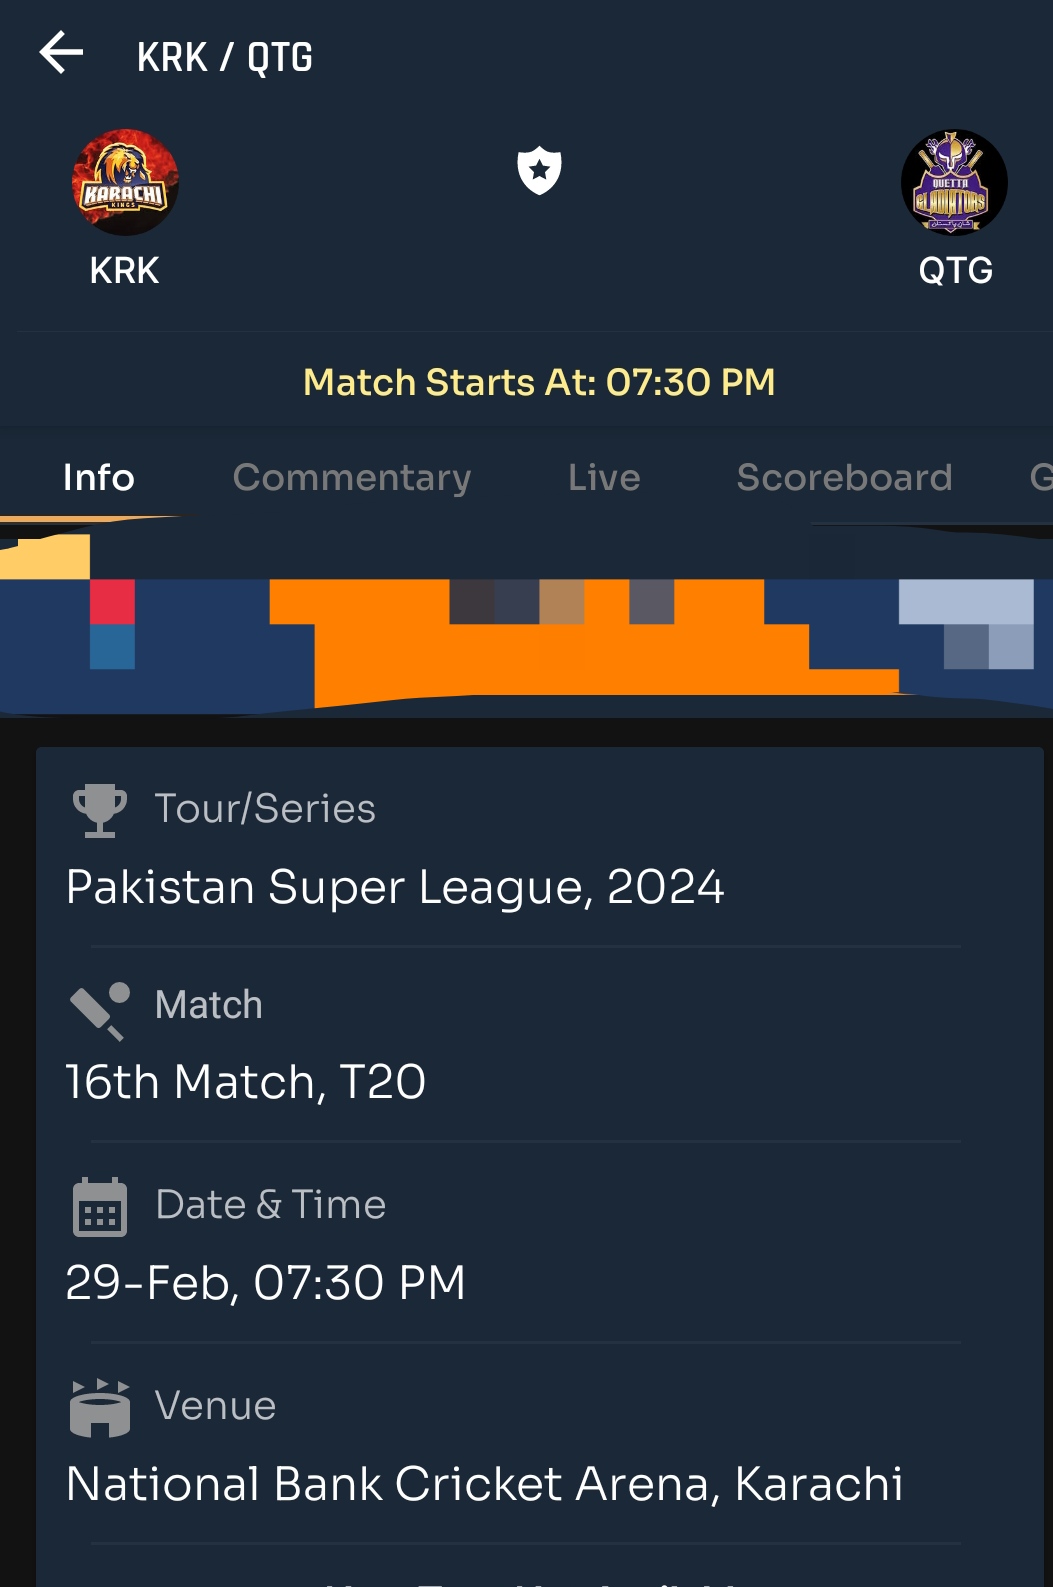 Today PSL Prediction |Match Number 16|KRK vs QTG| Toss and Match Analysis | Pitch & Weather Reports